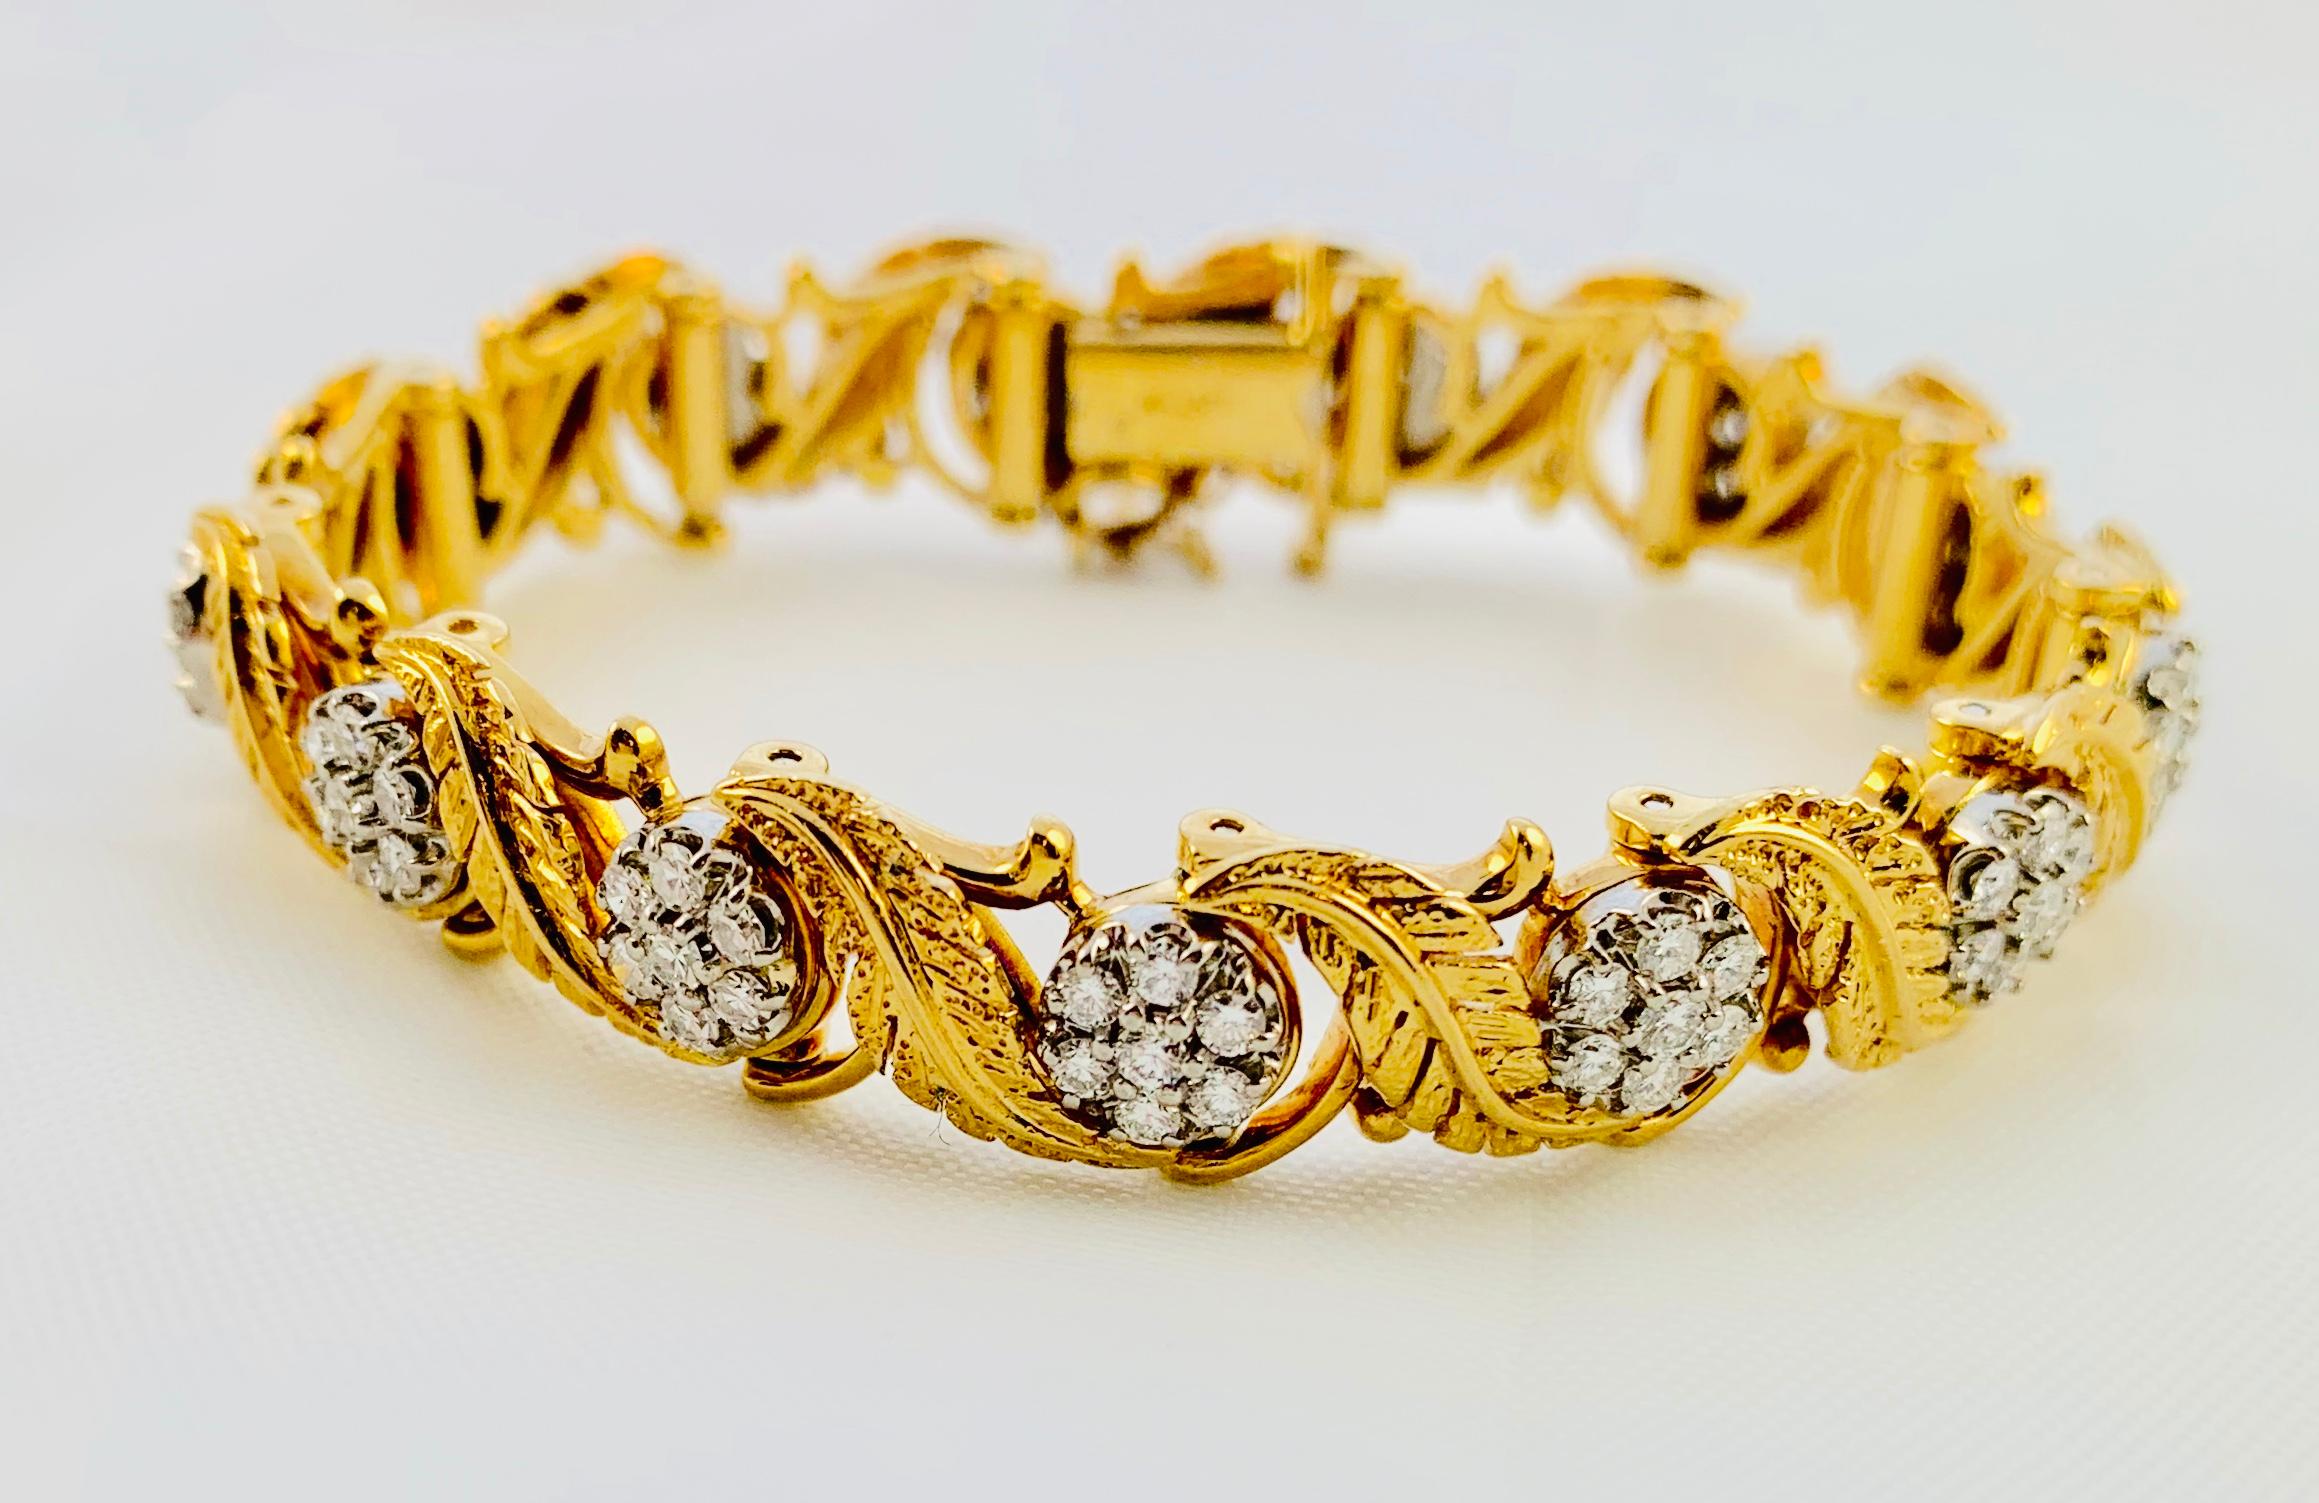 Beautiful Jabel Add A Section Bracelet! Made in 18K Yellow Gold, it features 13 sections. Each section contains 0.18 carats of diamonds so the carat total weight is roughly 3.25. It contains 91 gorgeous, single cut diamonds. This is a full bracelet.